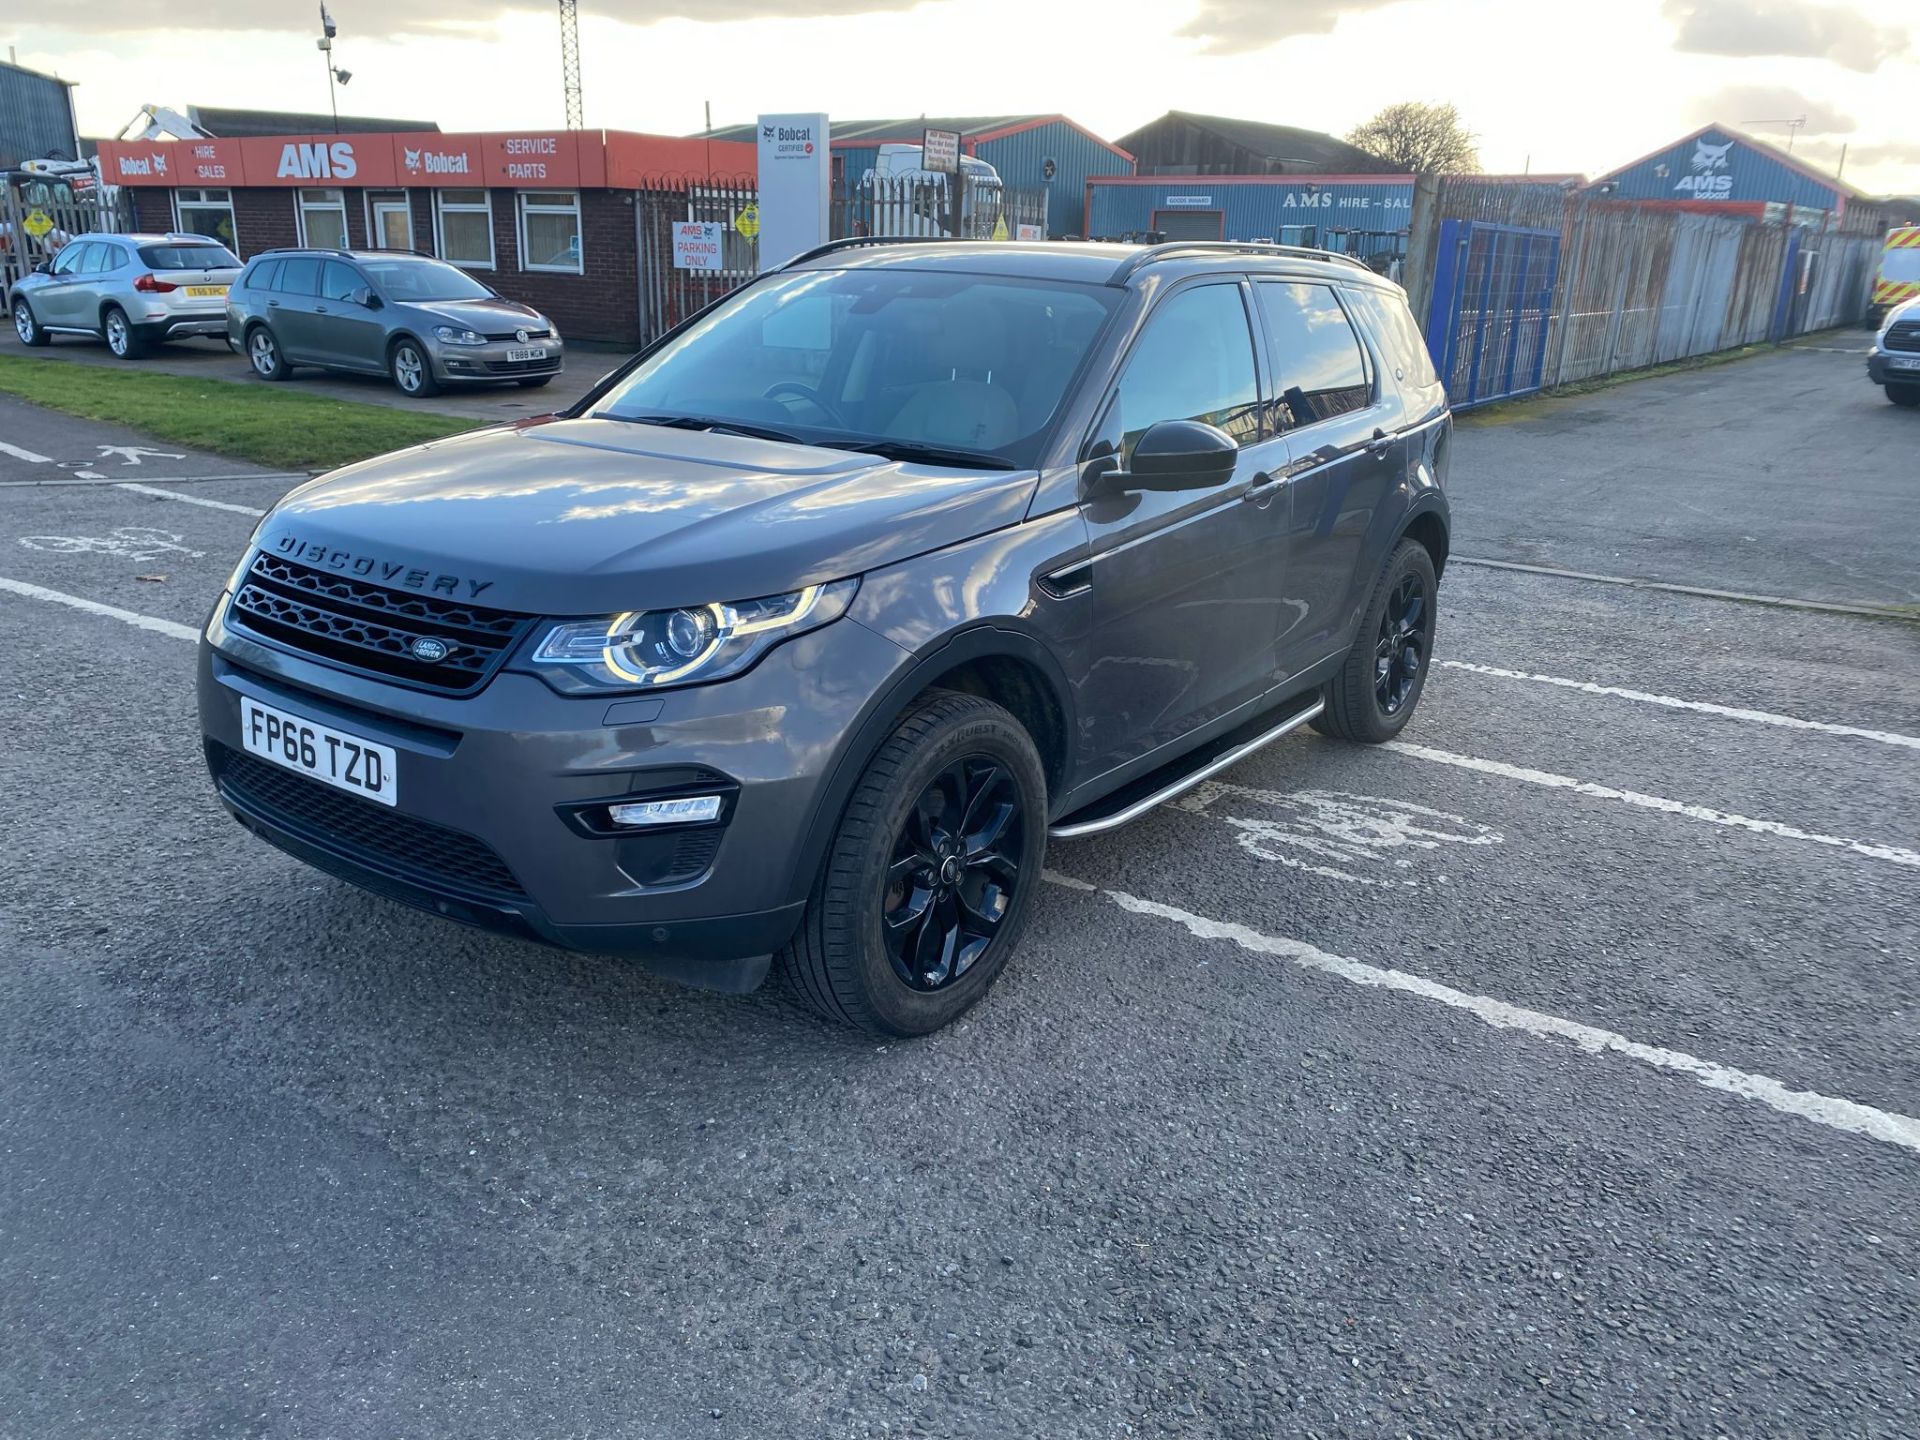 2016 66 LAND ROVER DISCOVERY SPORT HSE SUV ESTATE- 88K WITH LAND ROVER SERVICE HISTORY - PAN ROOF.